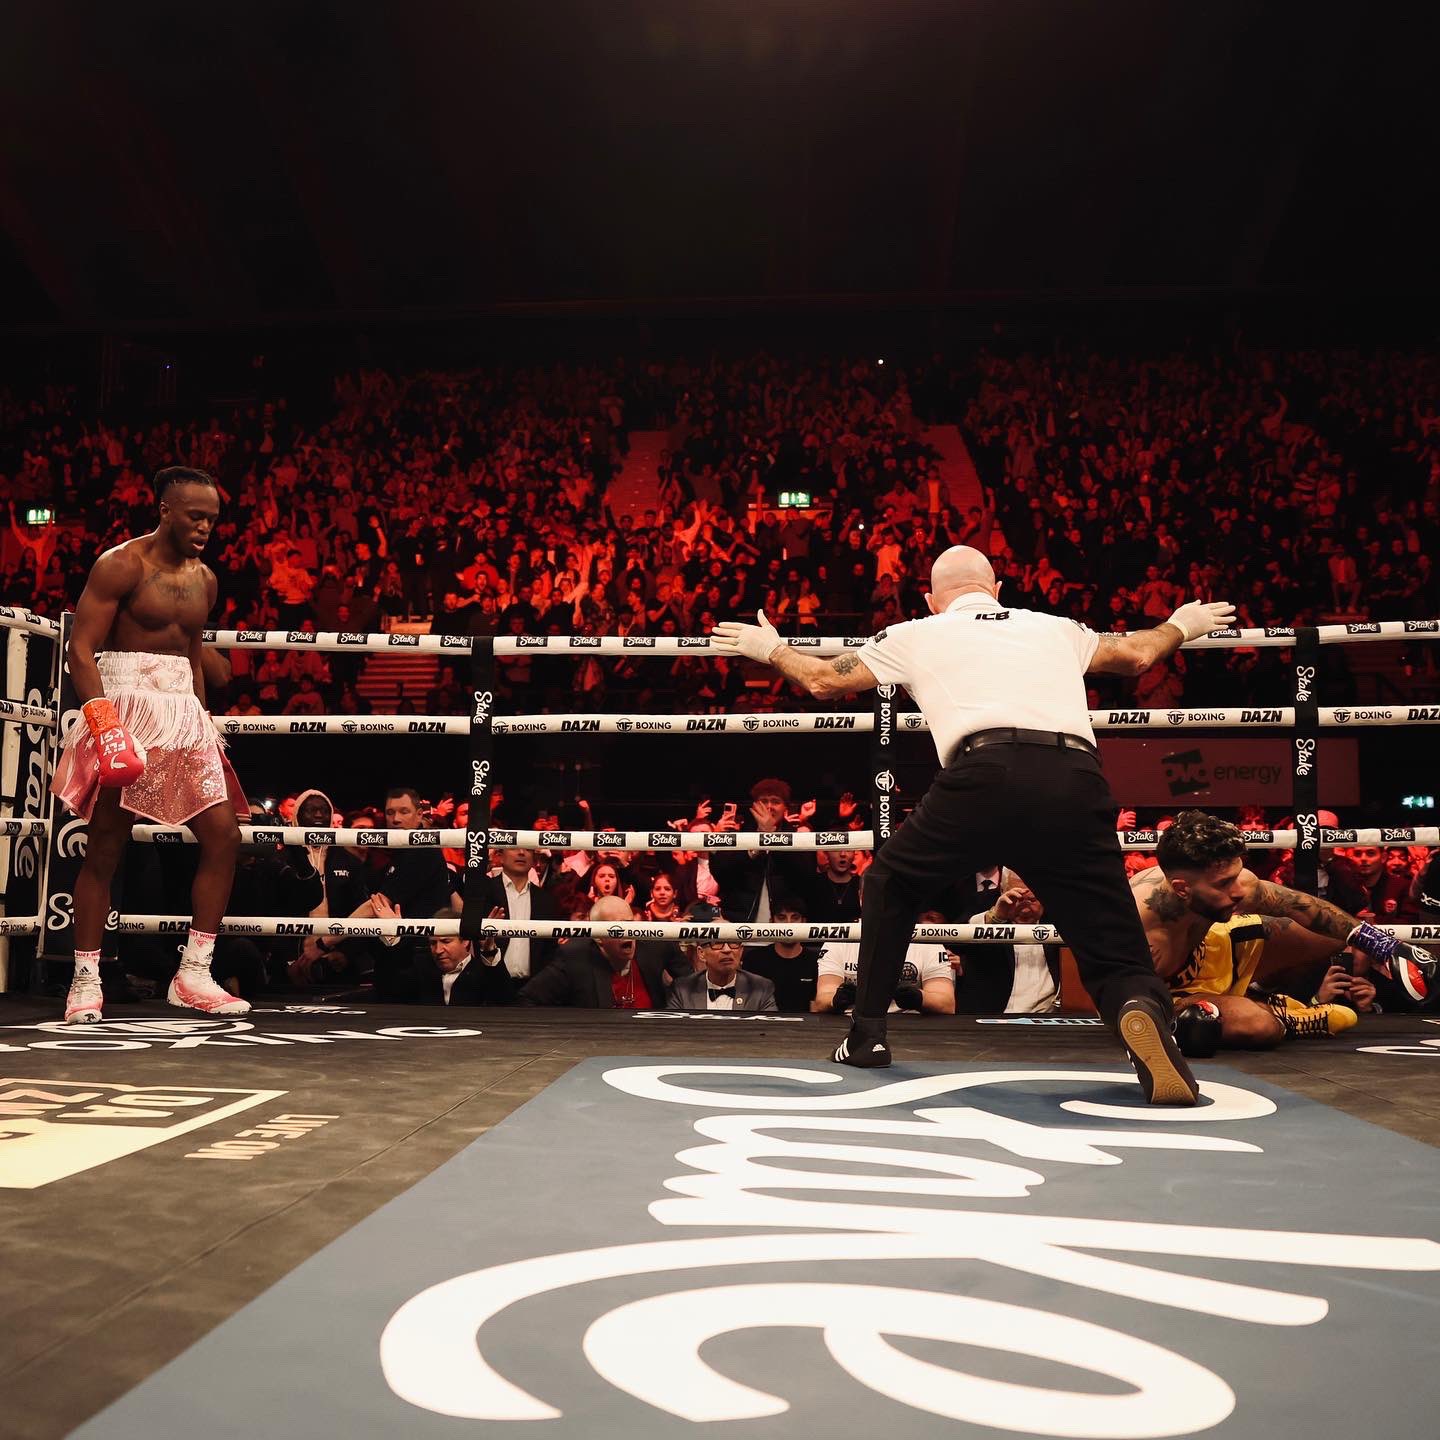 300 thousand sold broadcasts for the Misfits Boxing evening